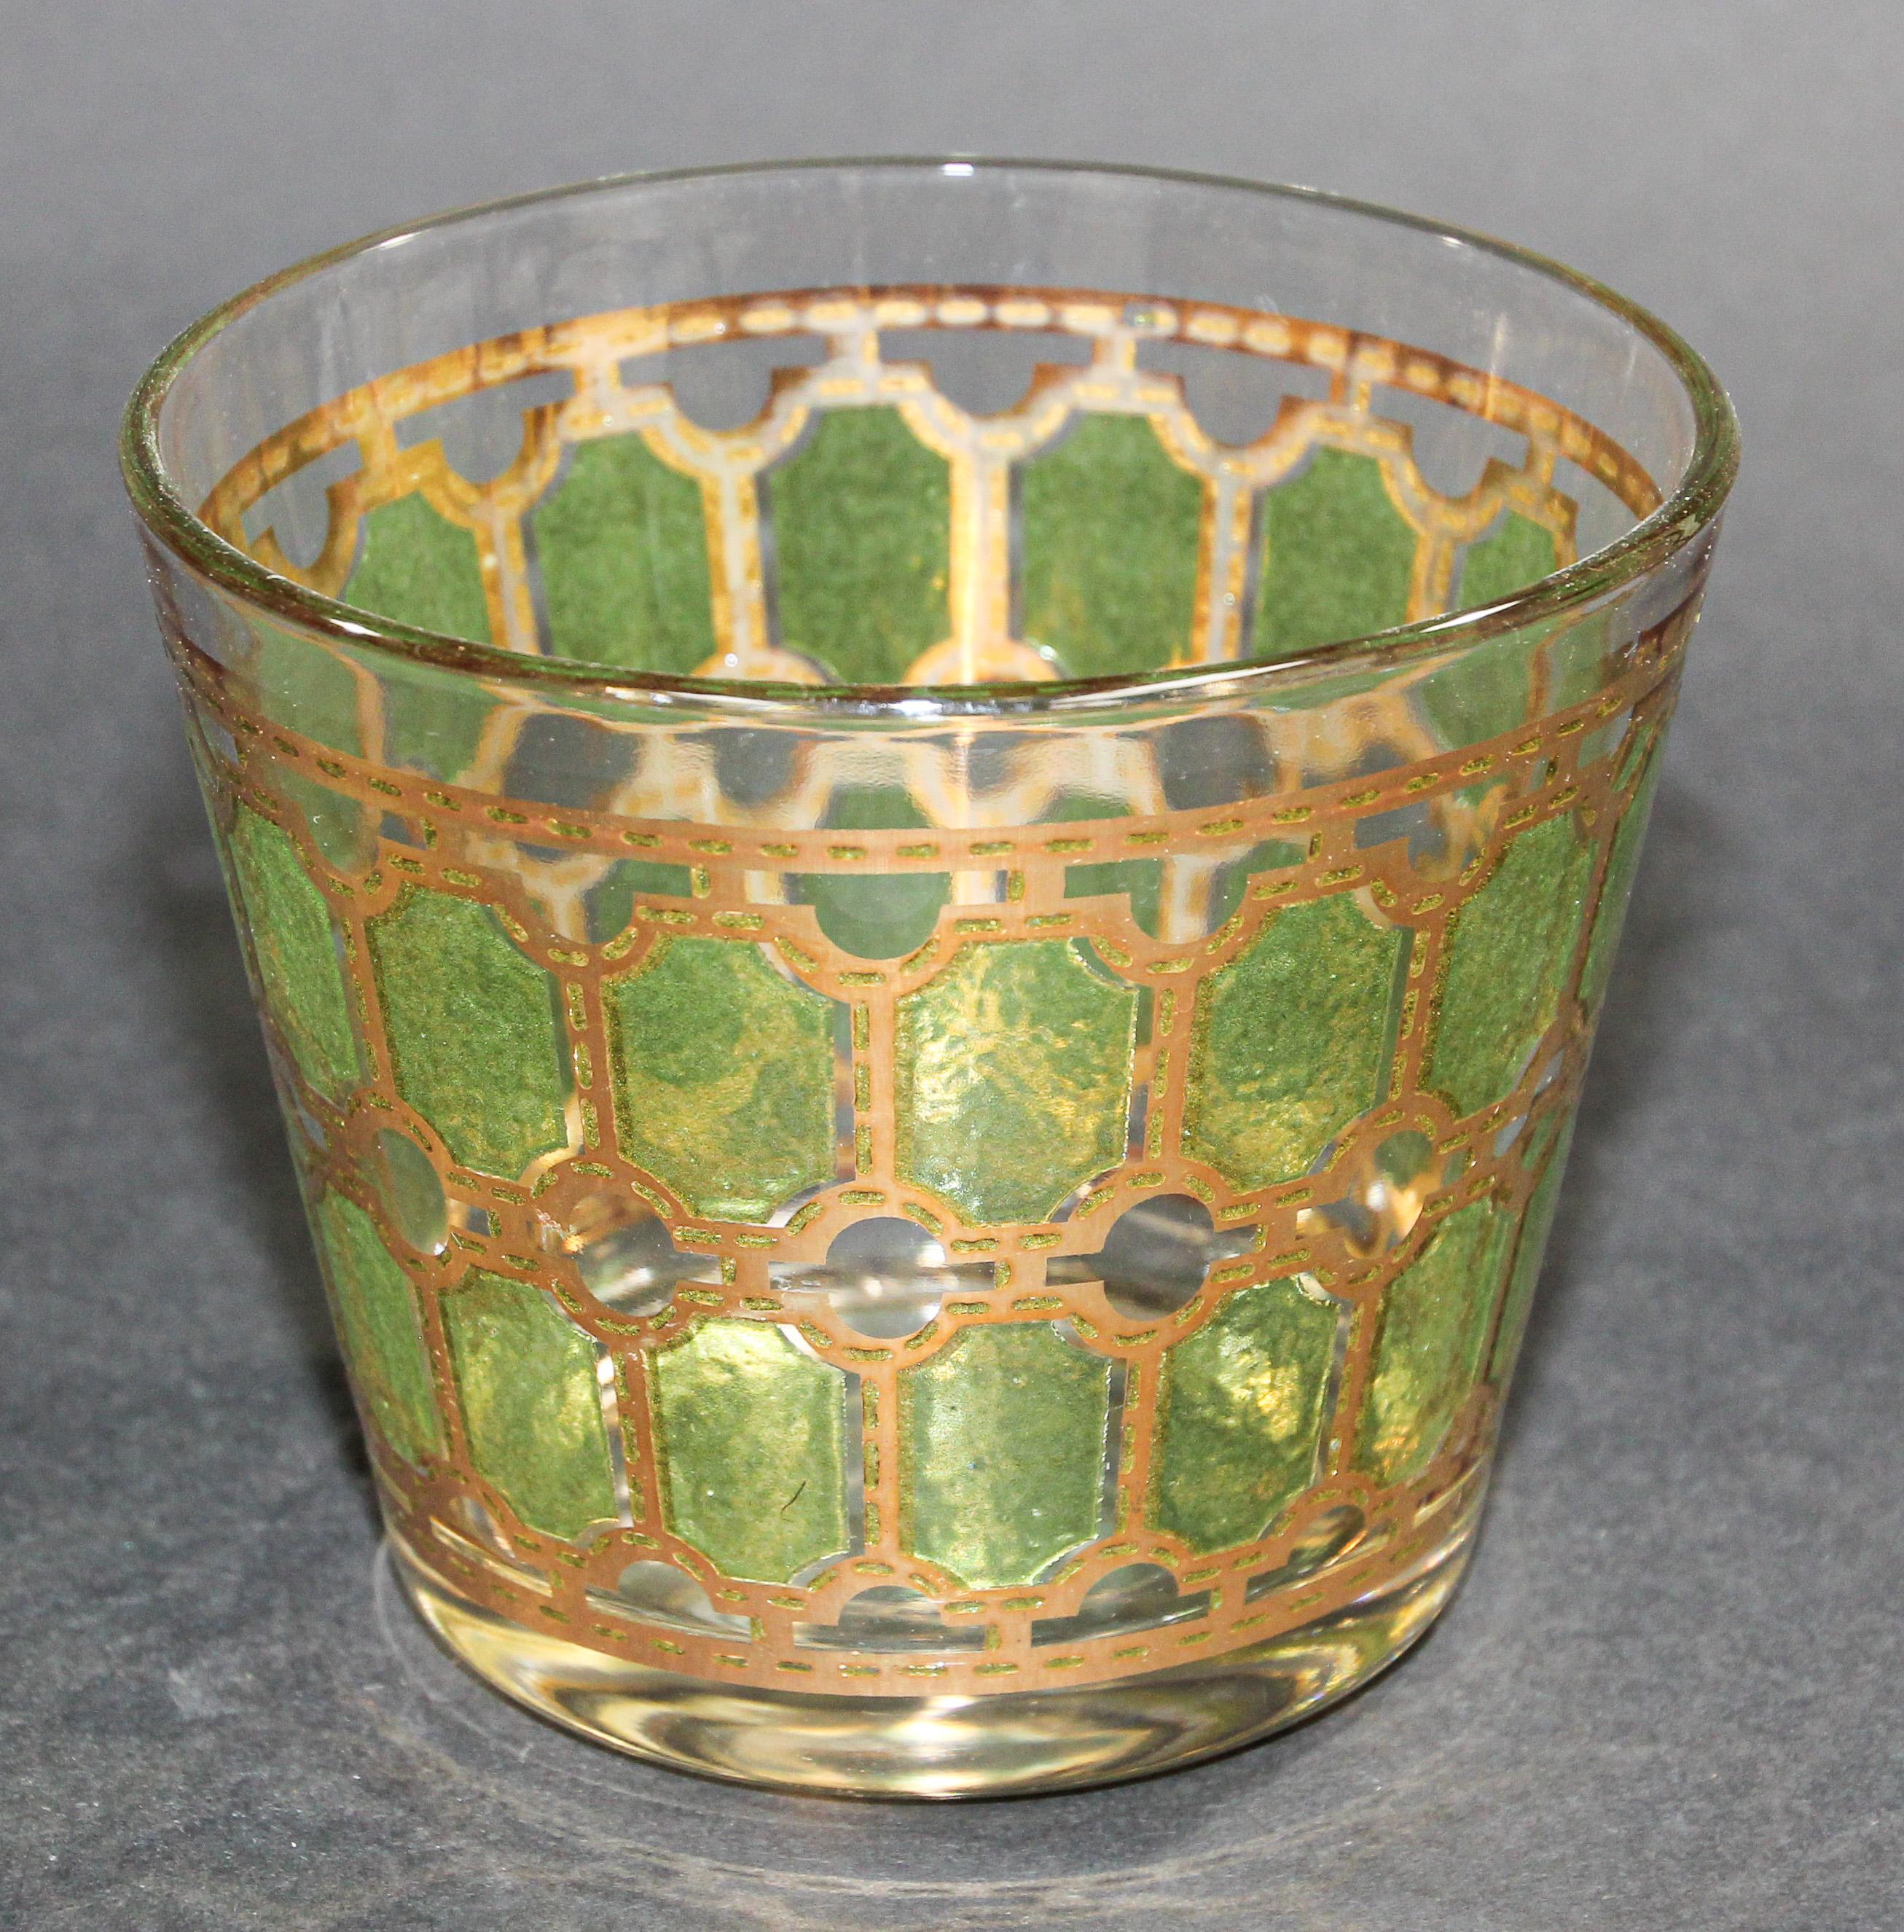 Exquisite vintage midcentury green and gold ice bucket in the style of Culver, 1960s
Valencia Moorish designs style.
Tres chic! It is very rich looking. The richness of the green color and gold do not show up in the photos.
Measures:
Ice bucket: